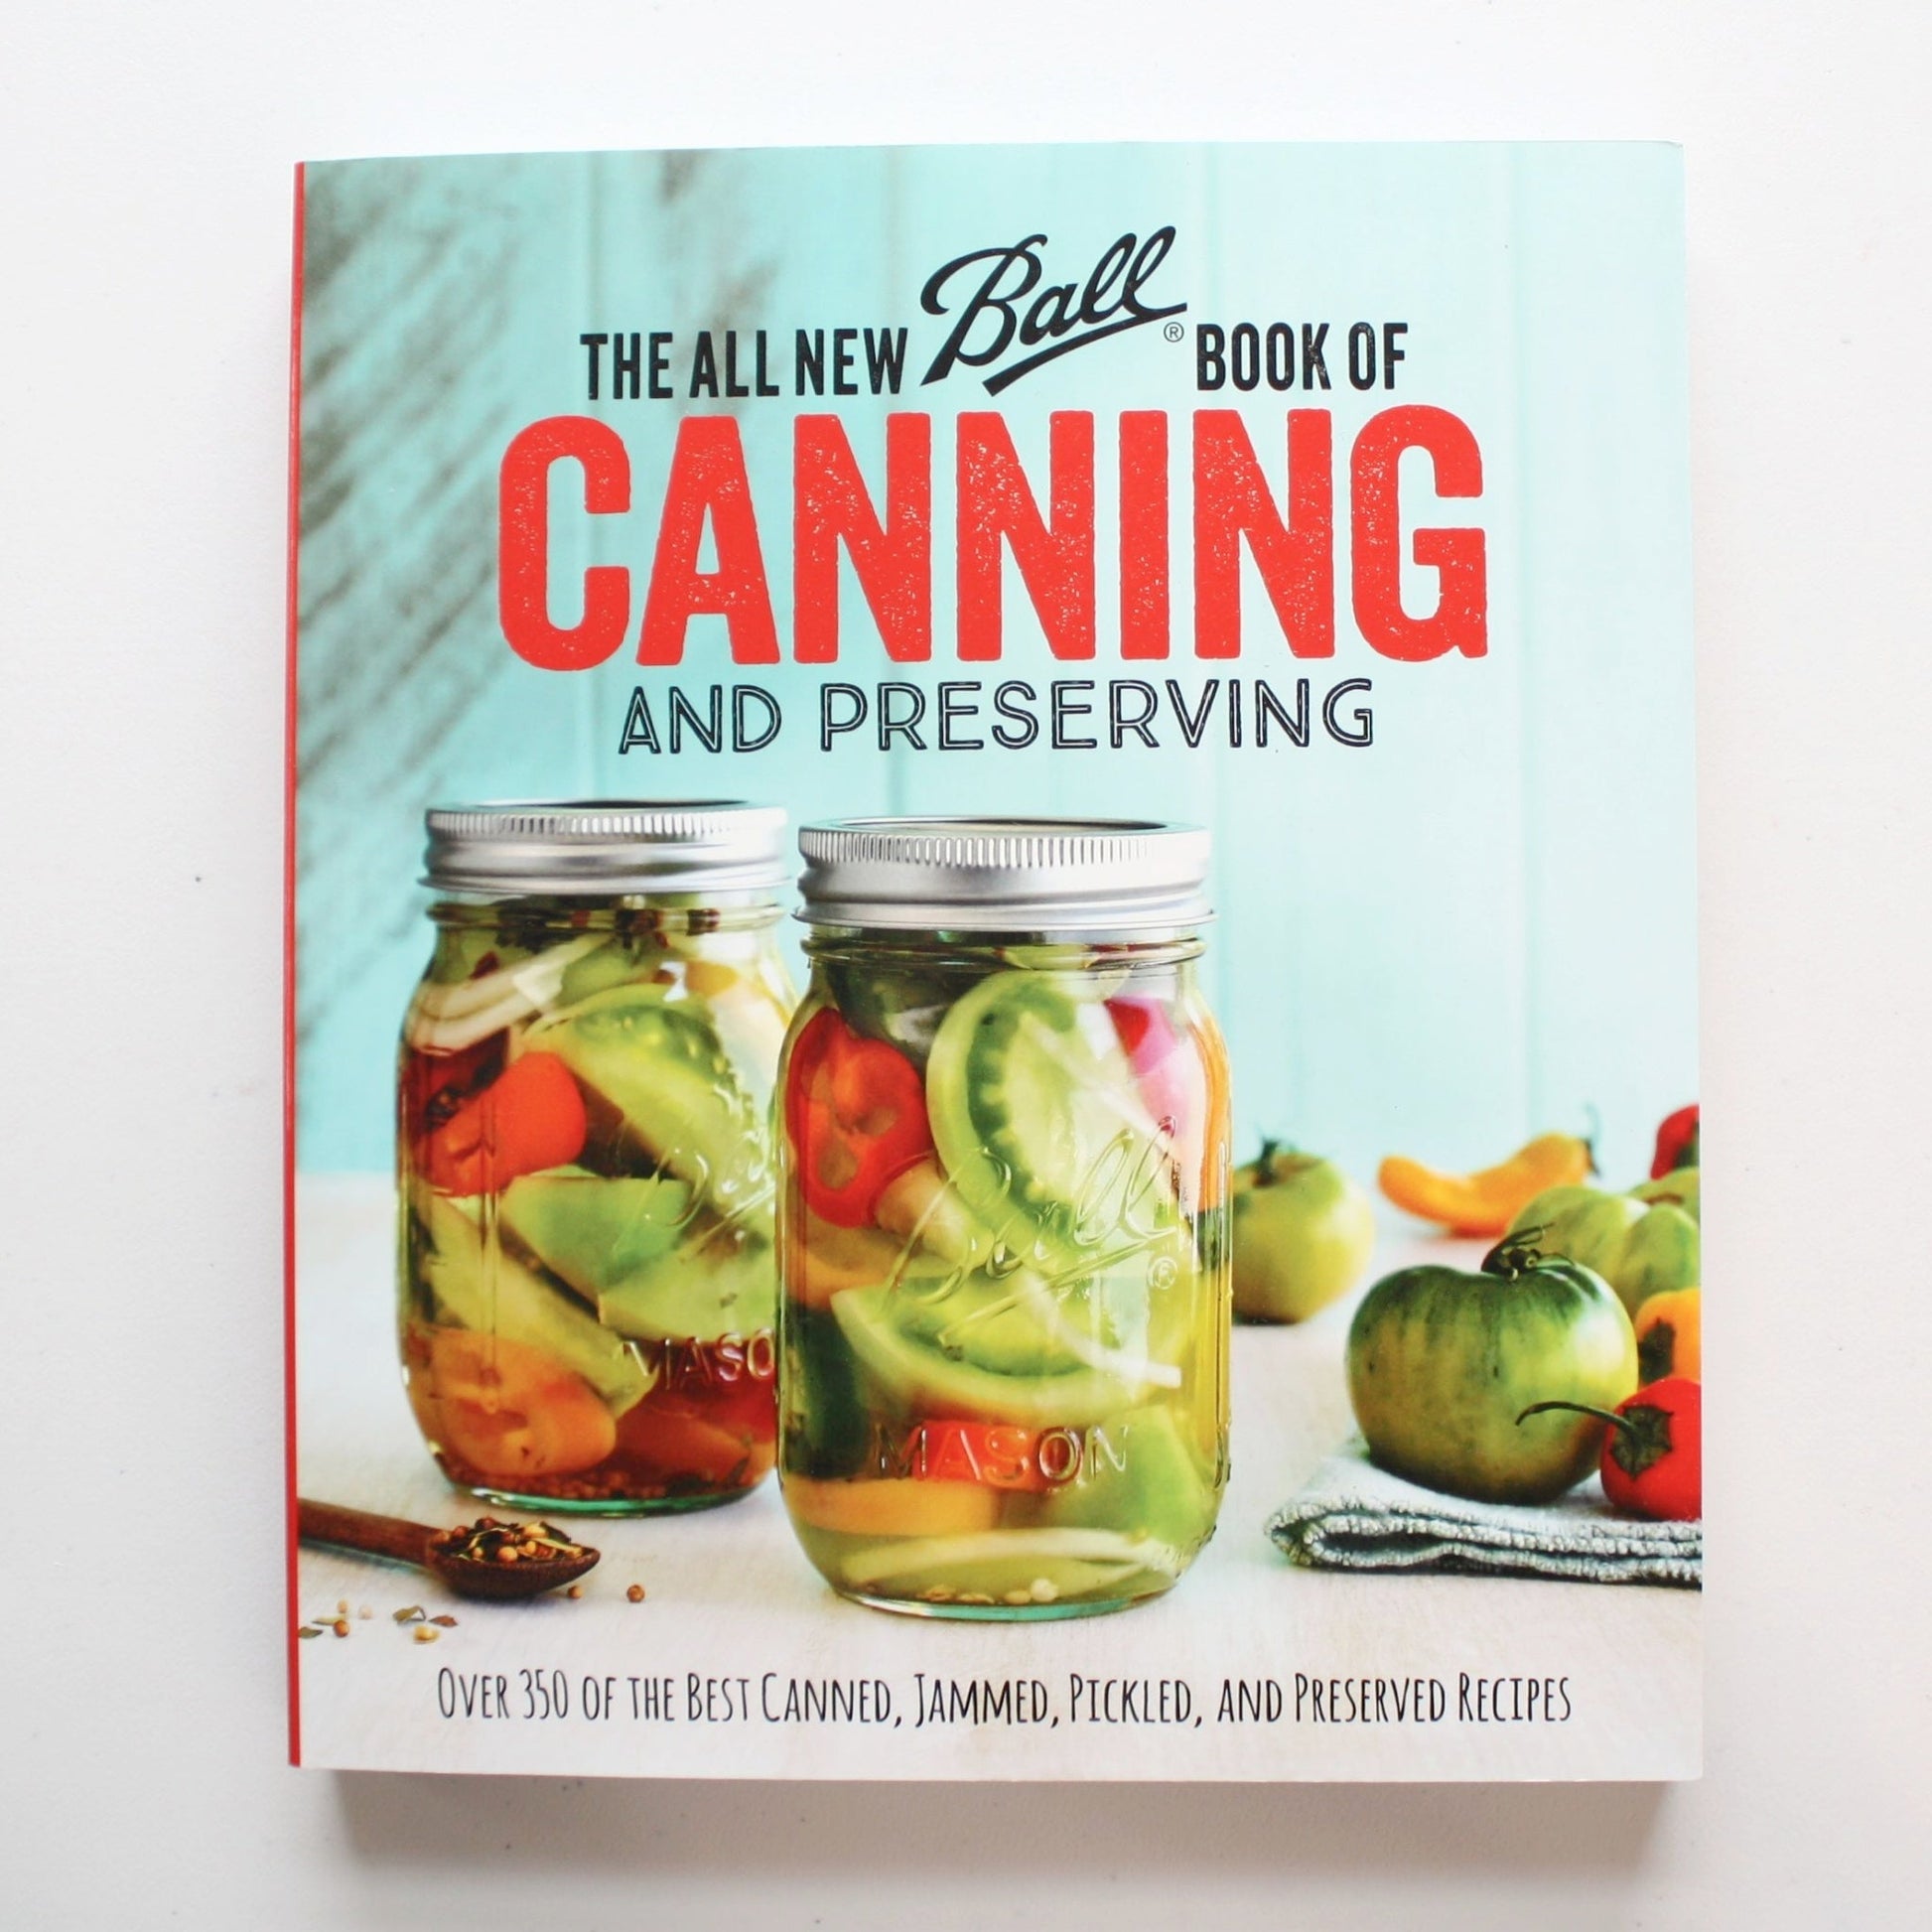 The All New Ball Book of Canning and Preserving - Made in the USA